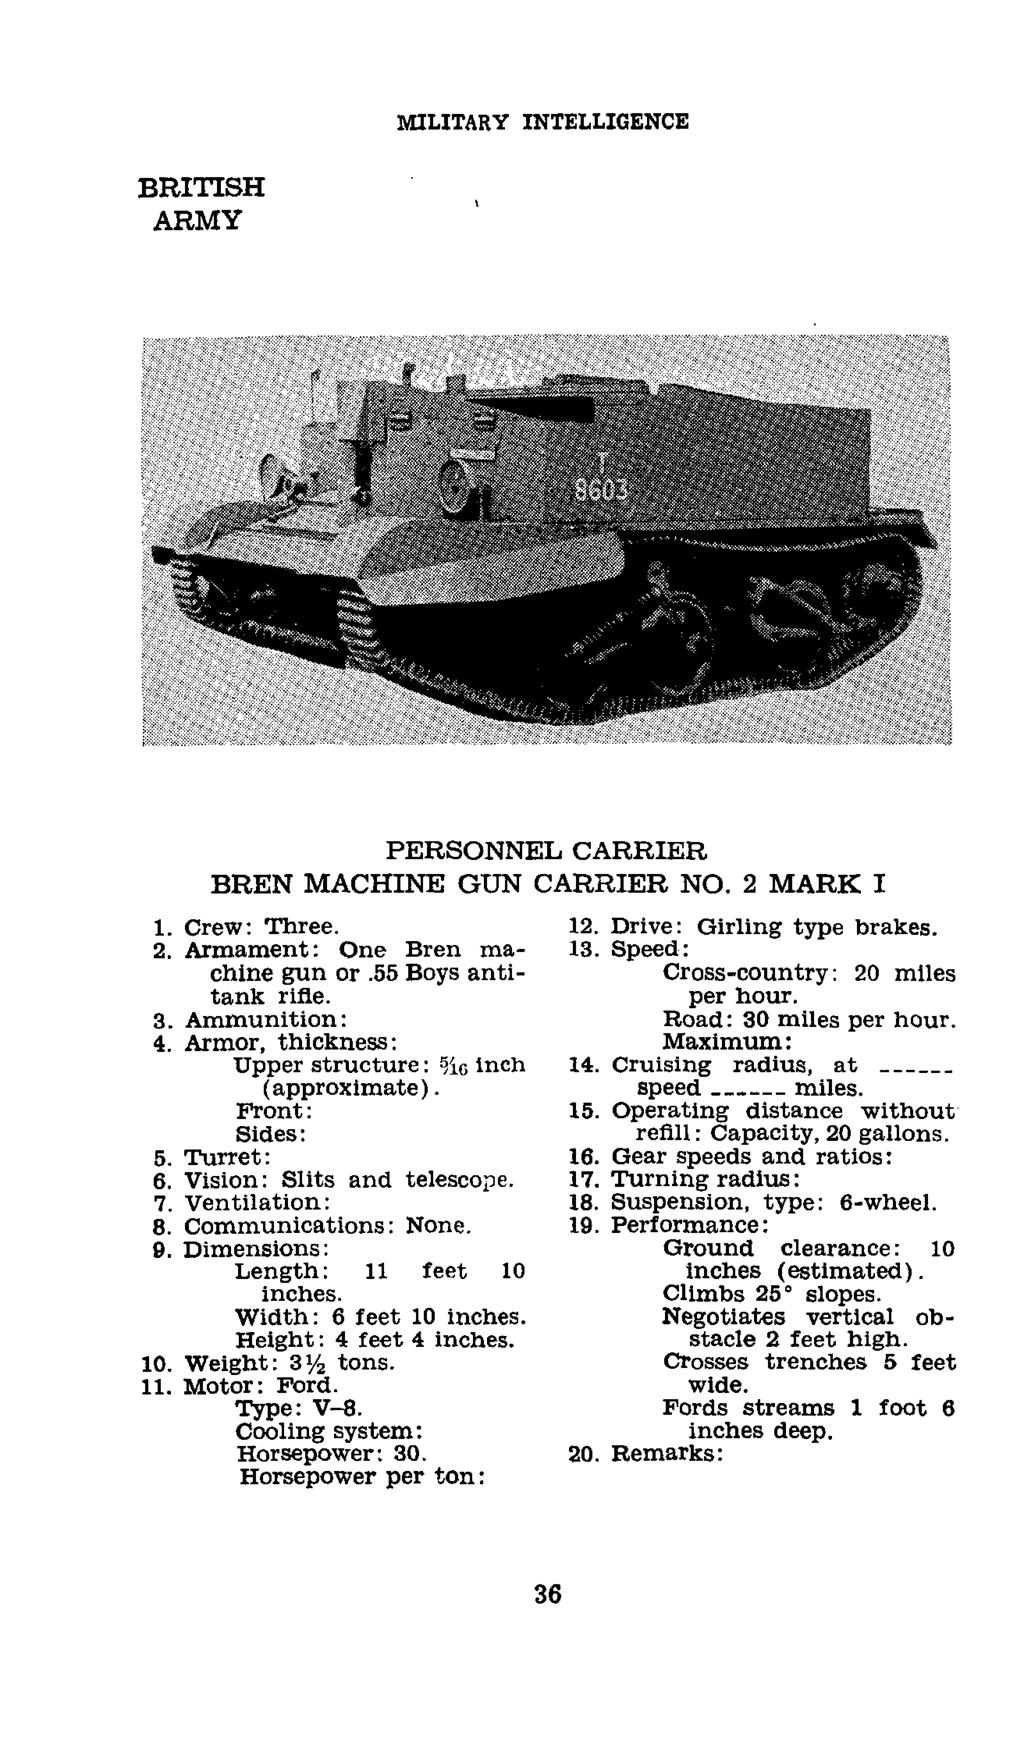 MILITARY INTELLIGENCE PERSONNEL CARRIER BREN MACHINE GUN CARRIER NO. 2 MARK I 1. Crew: Three. 12. Drive: Girling type brakes. 2. Armament: One Bren ma- 13. Speed: chine gun or.